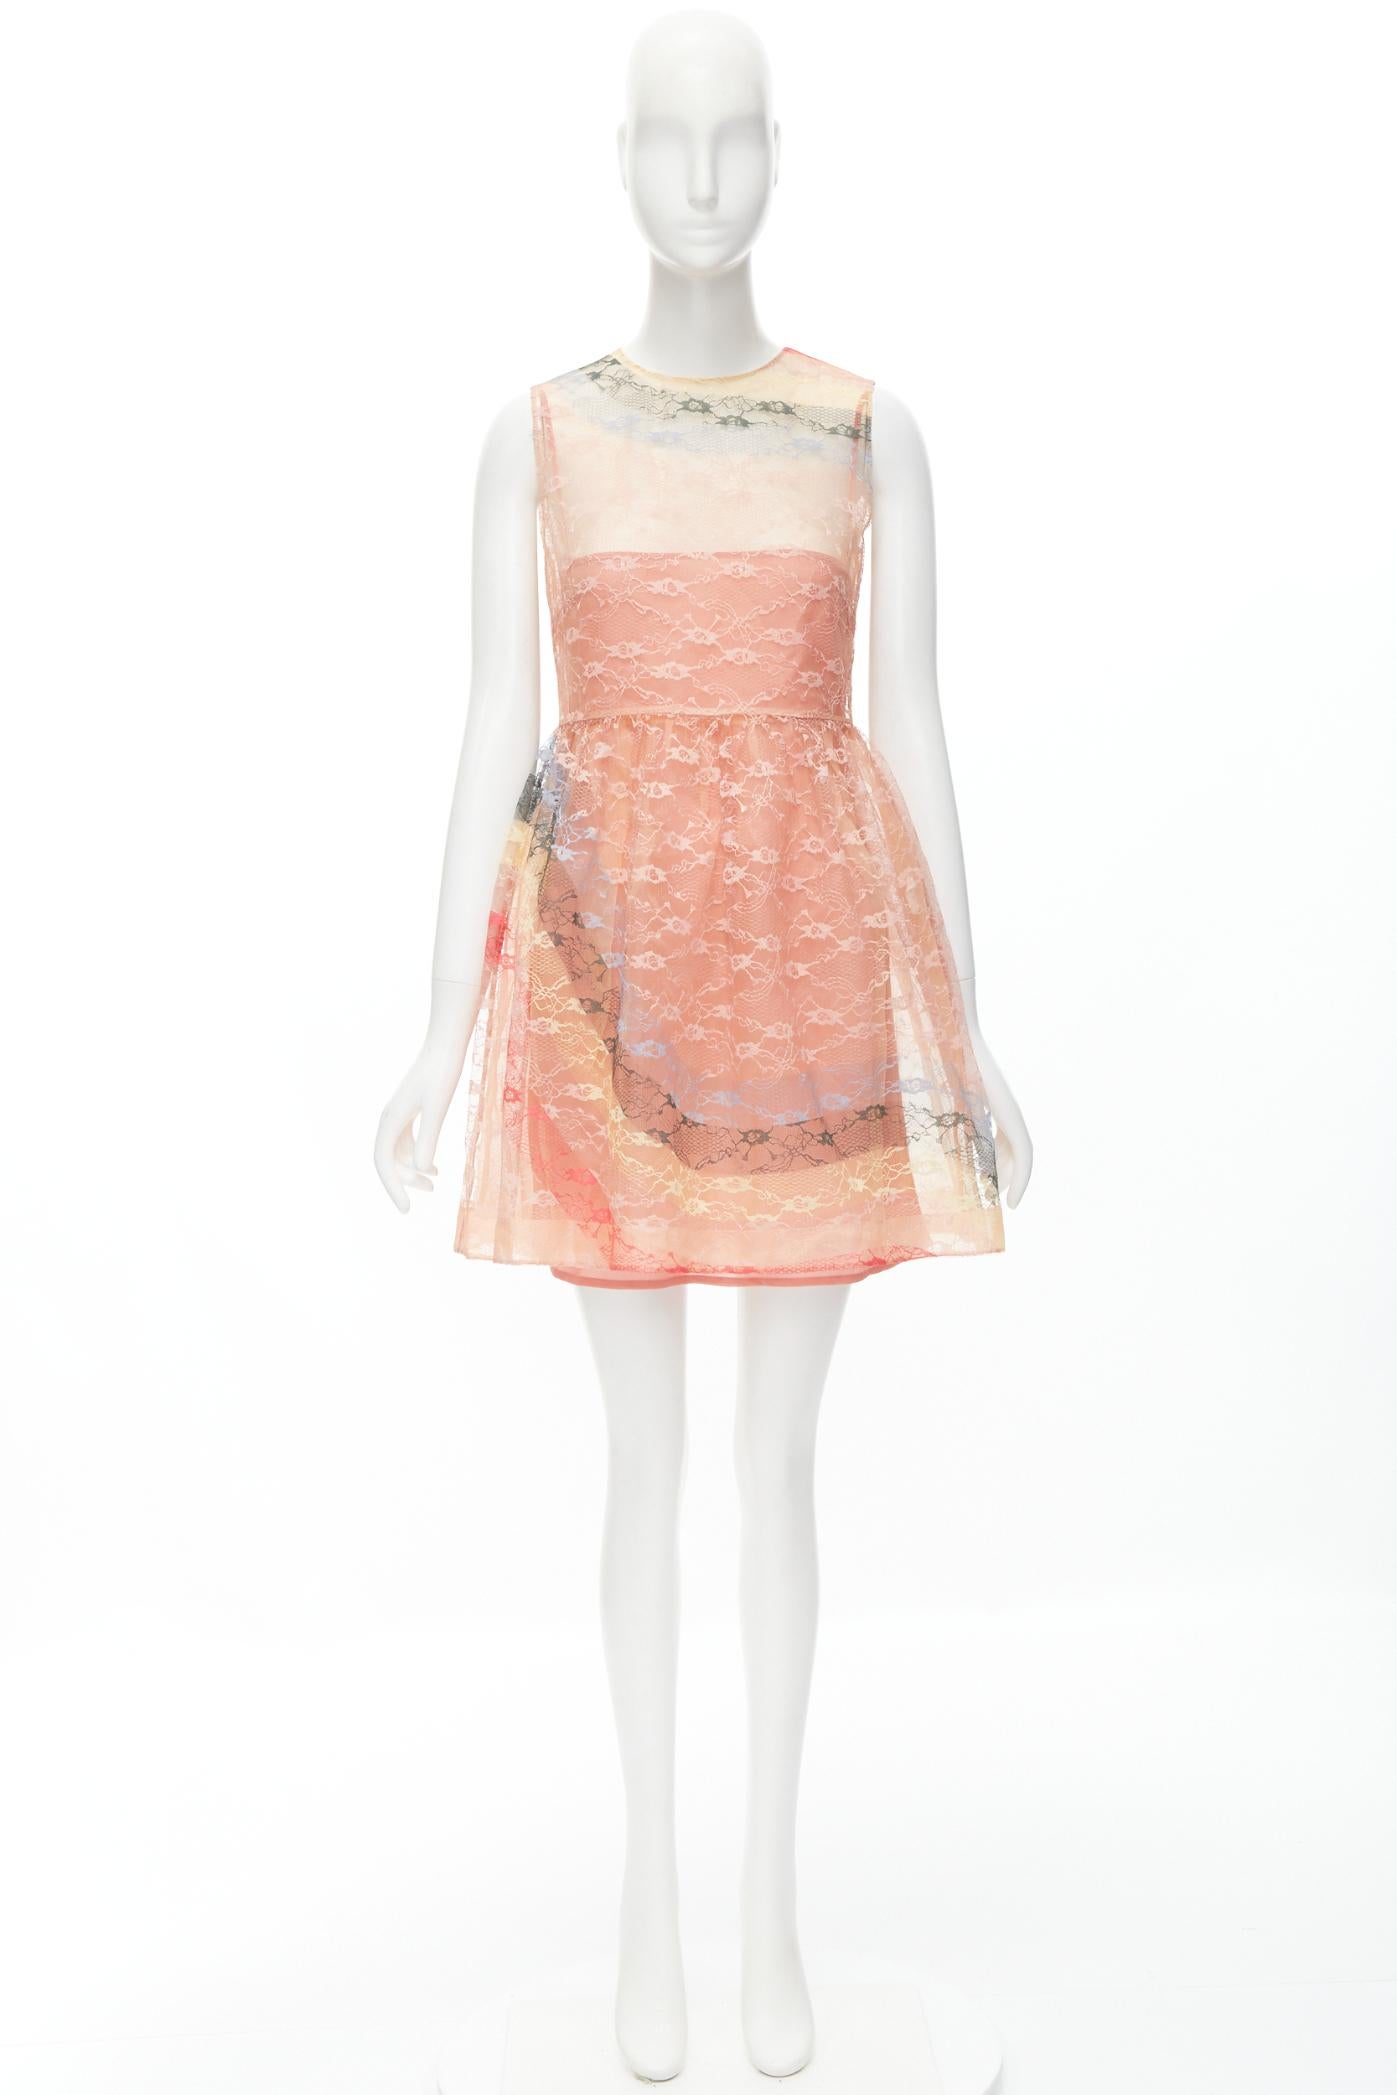 RED VALENTINO peach rainbow lace sleeveless fit flared cocktail dress IT40 S For Sale 6